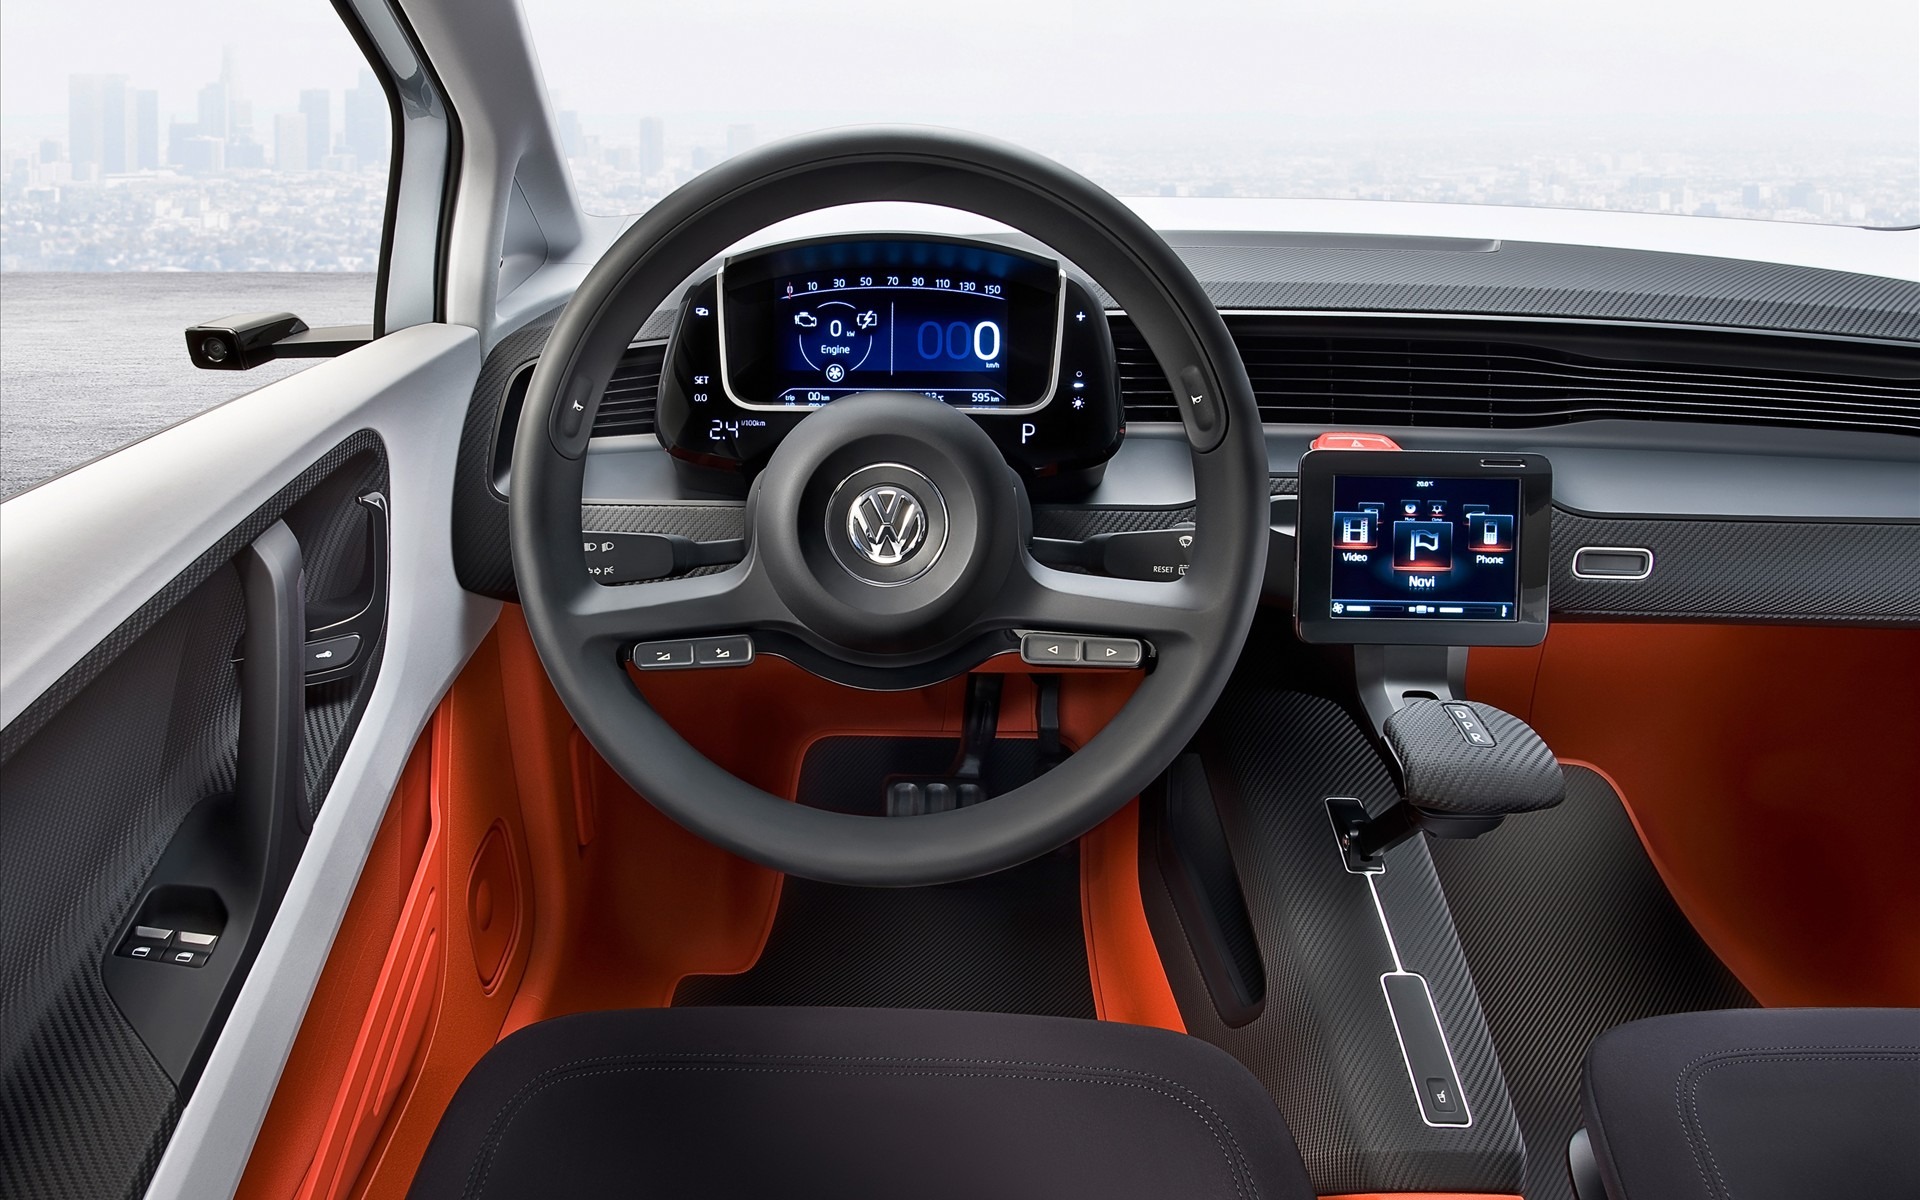 Volkswagen Concept Car tapety (1) #10 - 1920x1200